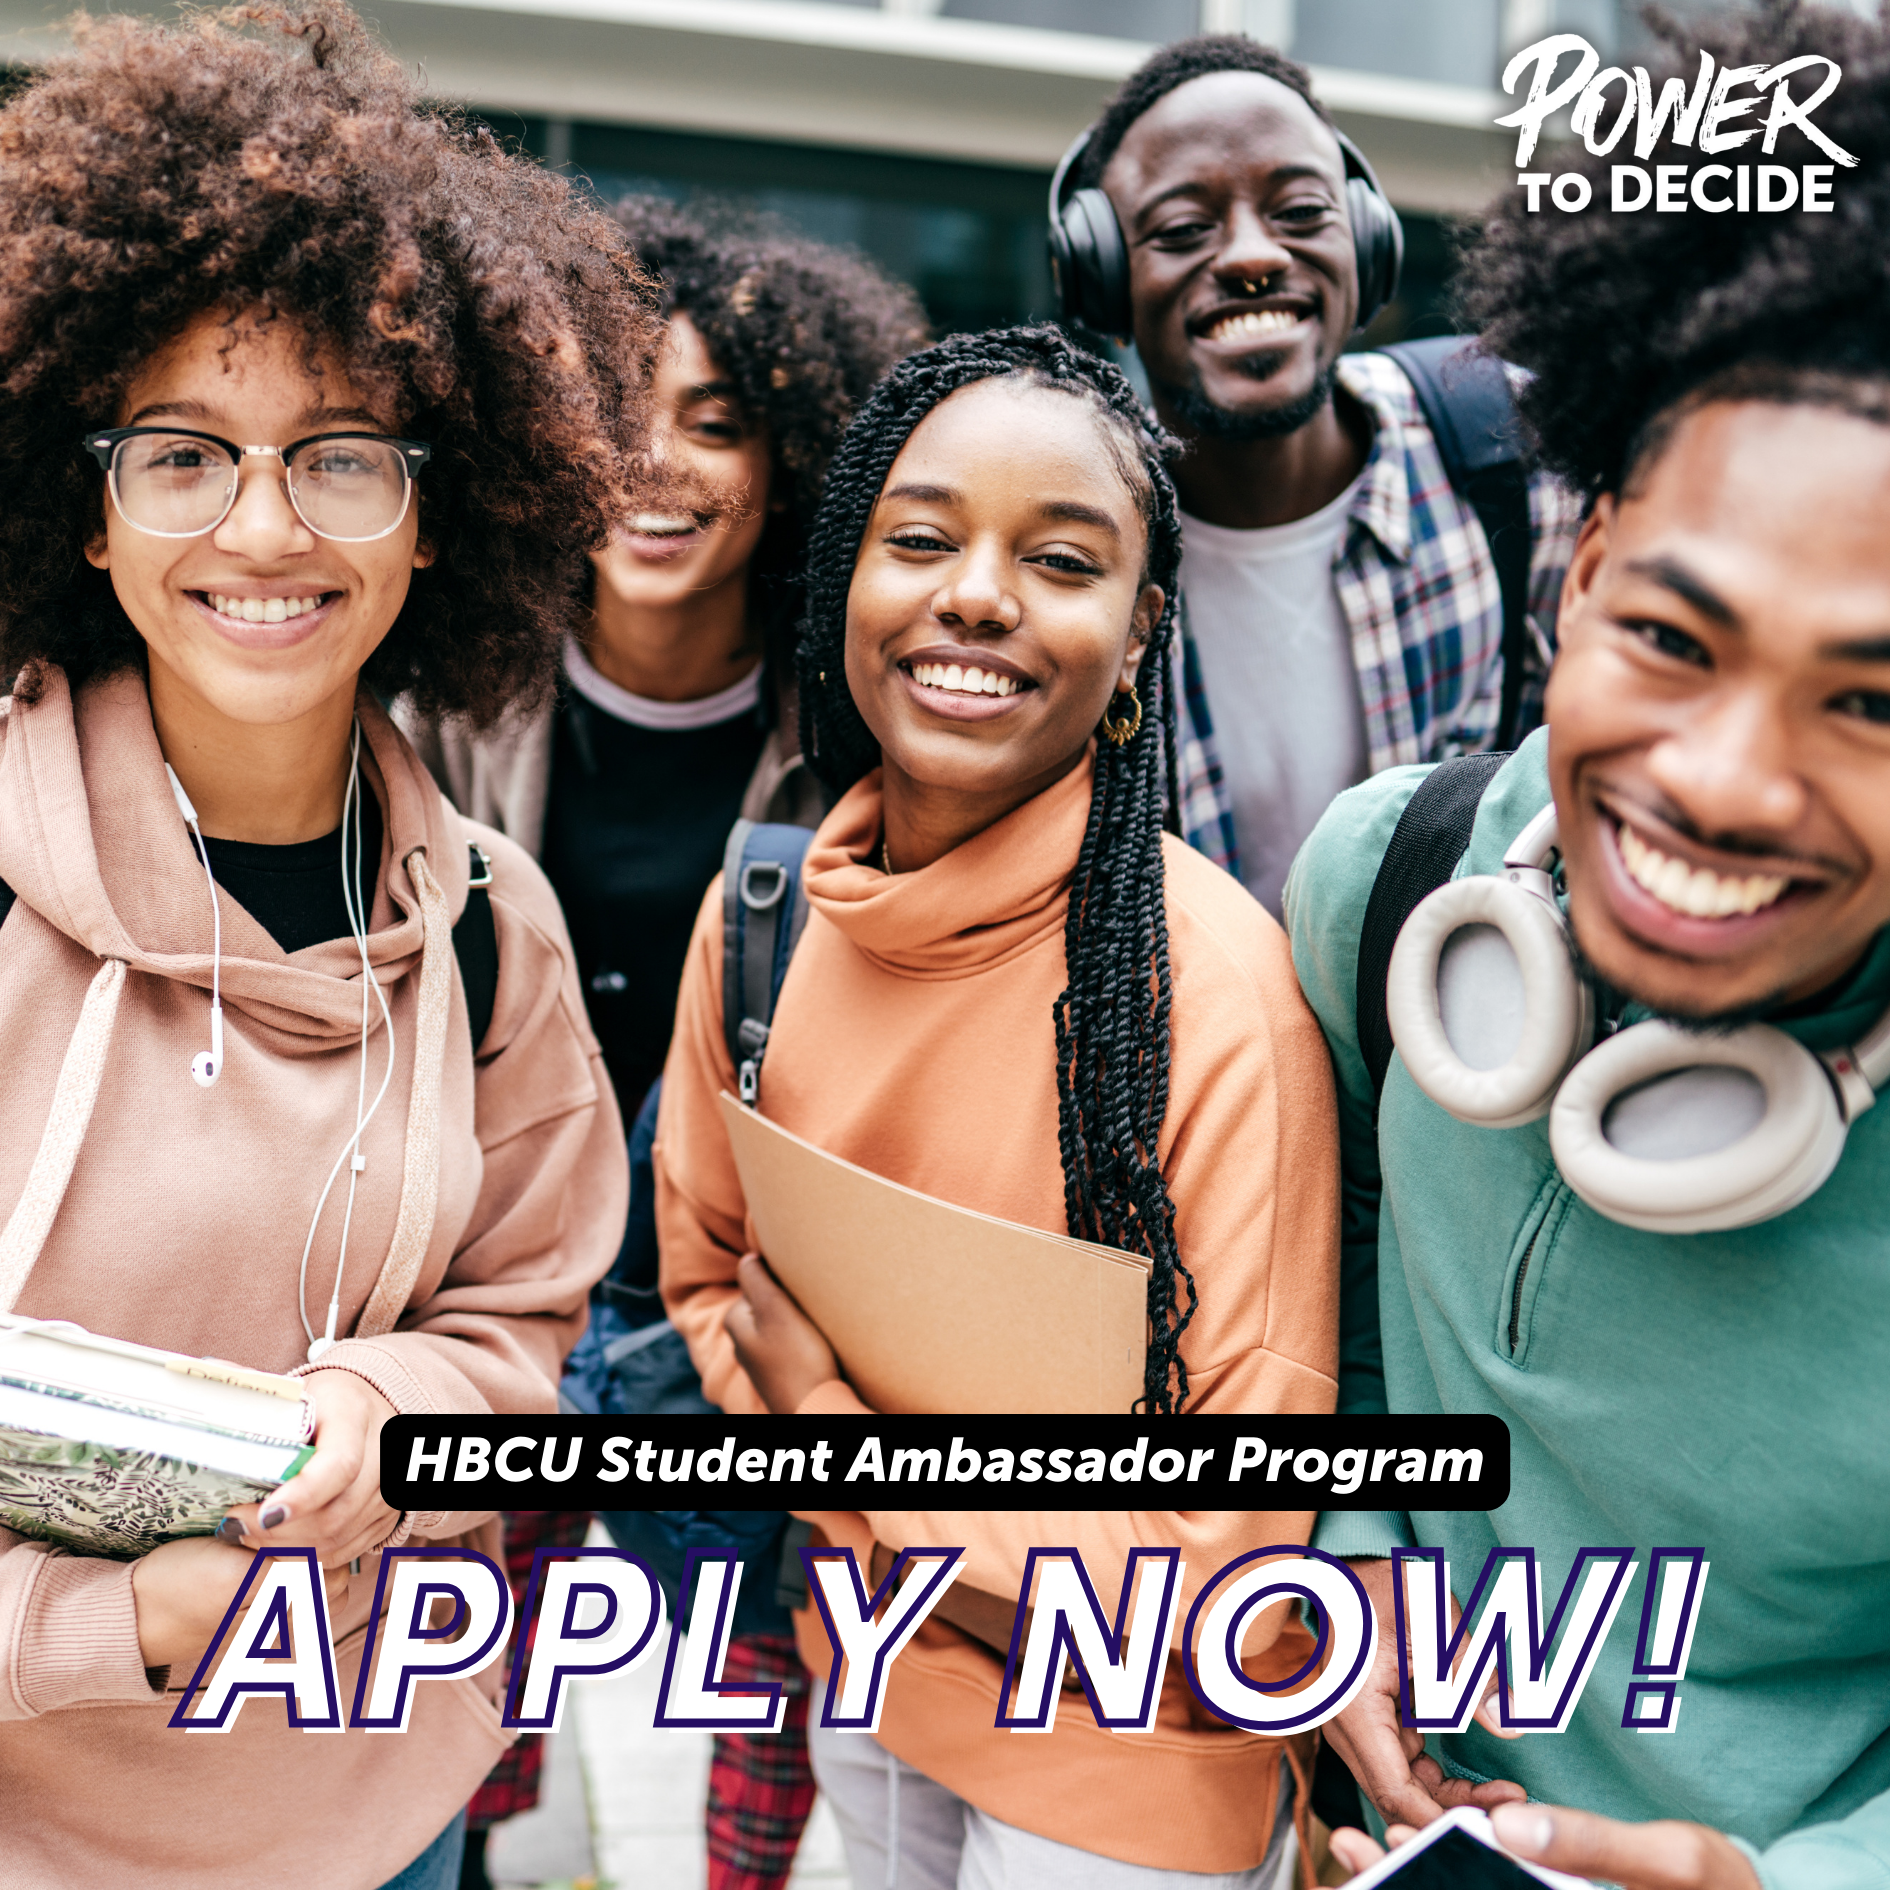 A photo of a group of Black college students and the words "HBCU Student Ambassador Program Apply Now!"